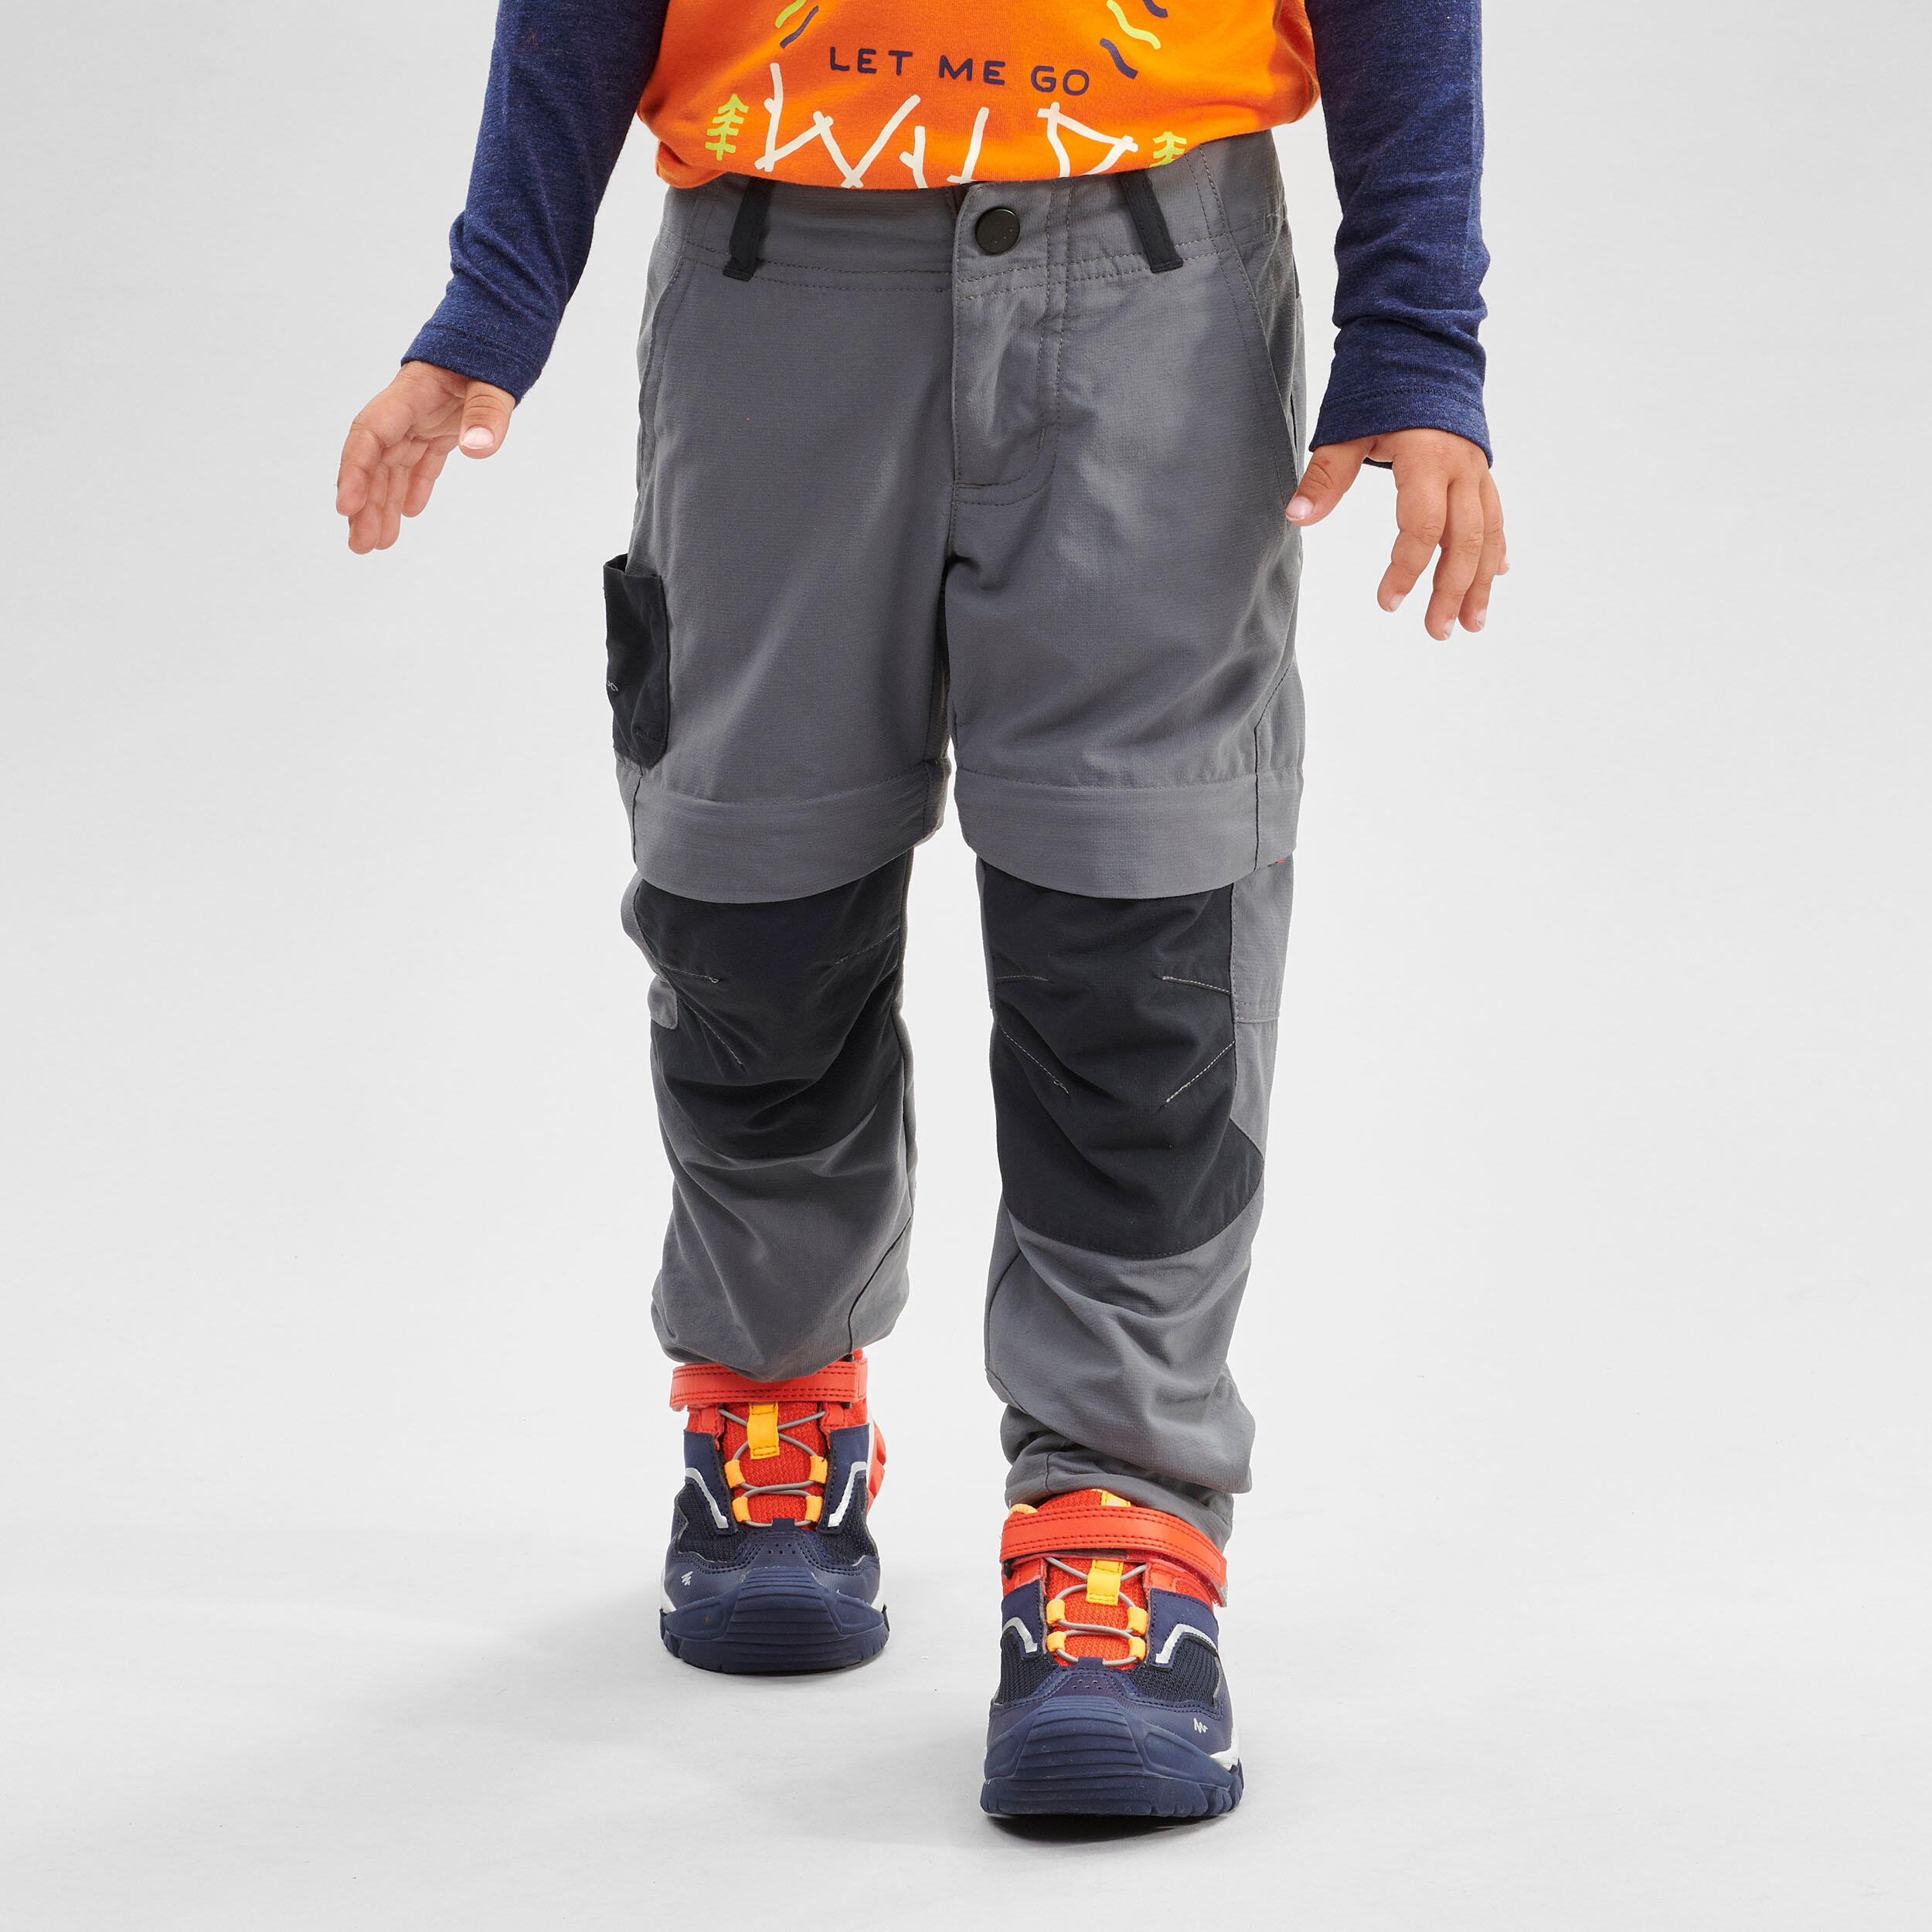 Kids' Hiking Zip-Off Trousers MH500 2-6 Years 6/14